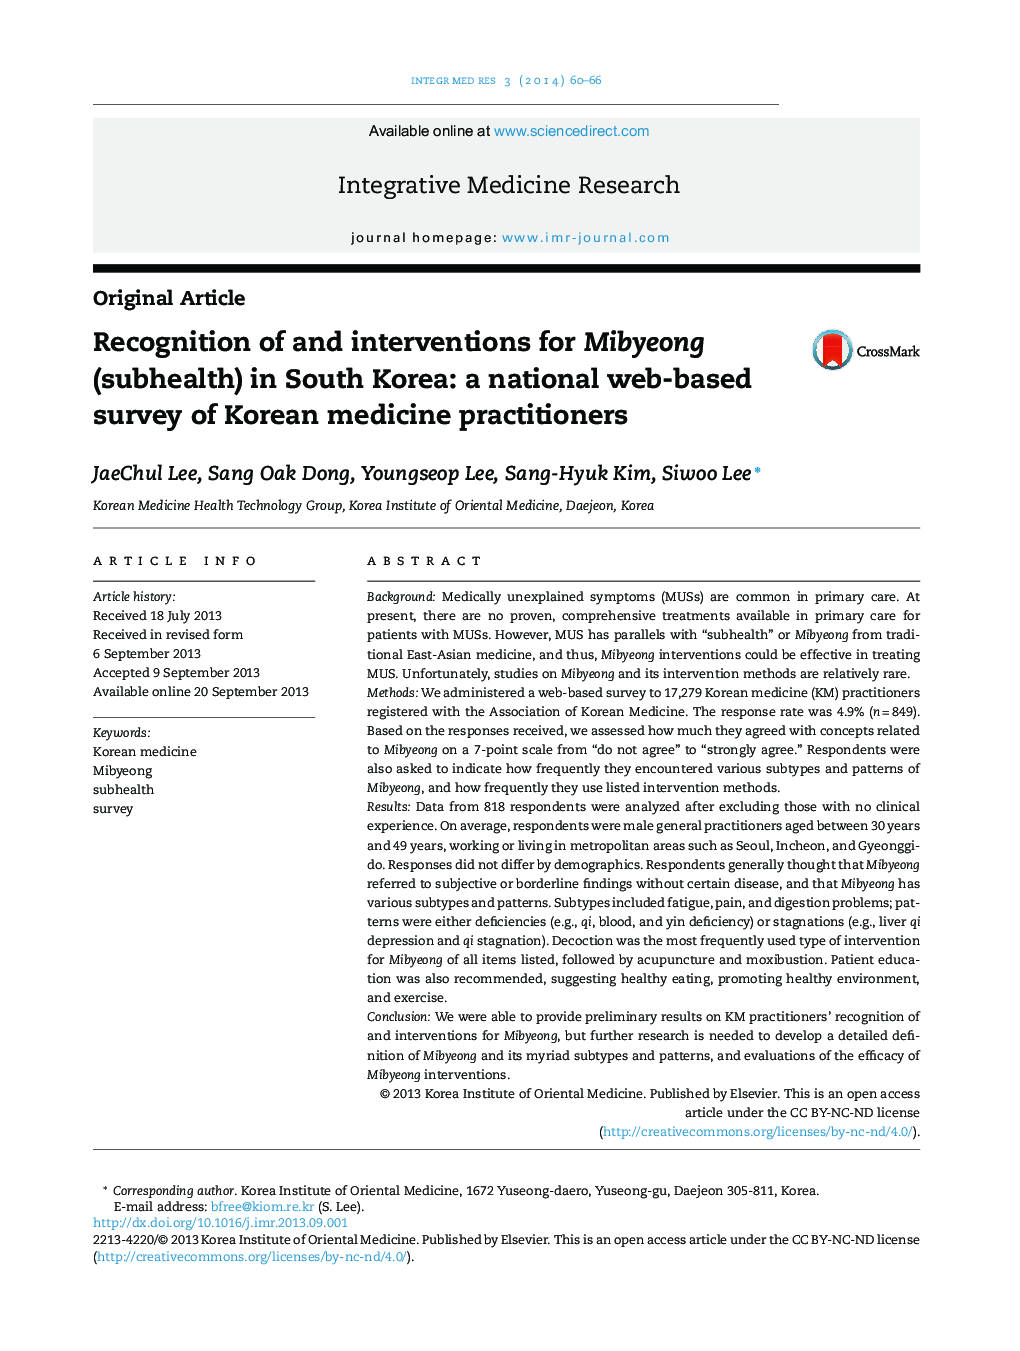 Recognition of and interventions for Mibyeong (subhealth) in South Korea: a national web-based survey of Korean medicine practitioners